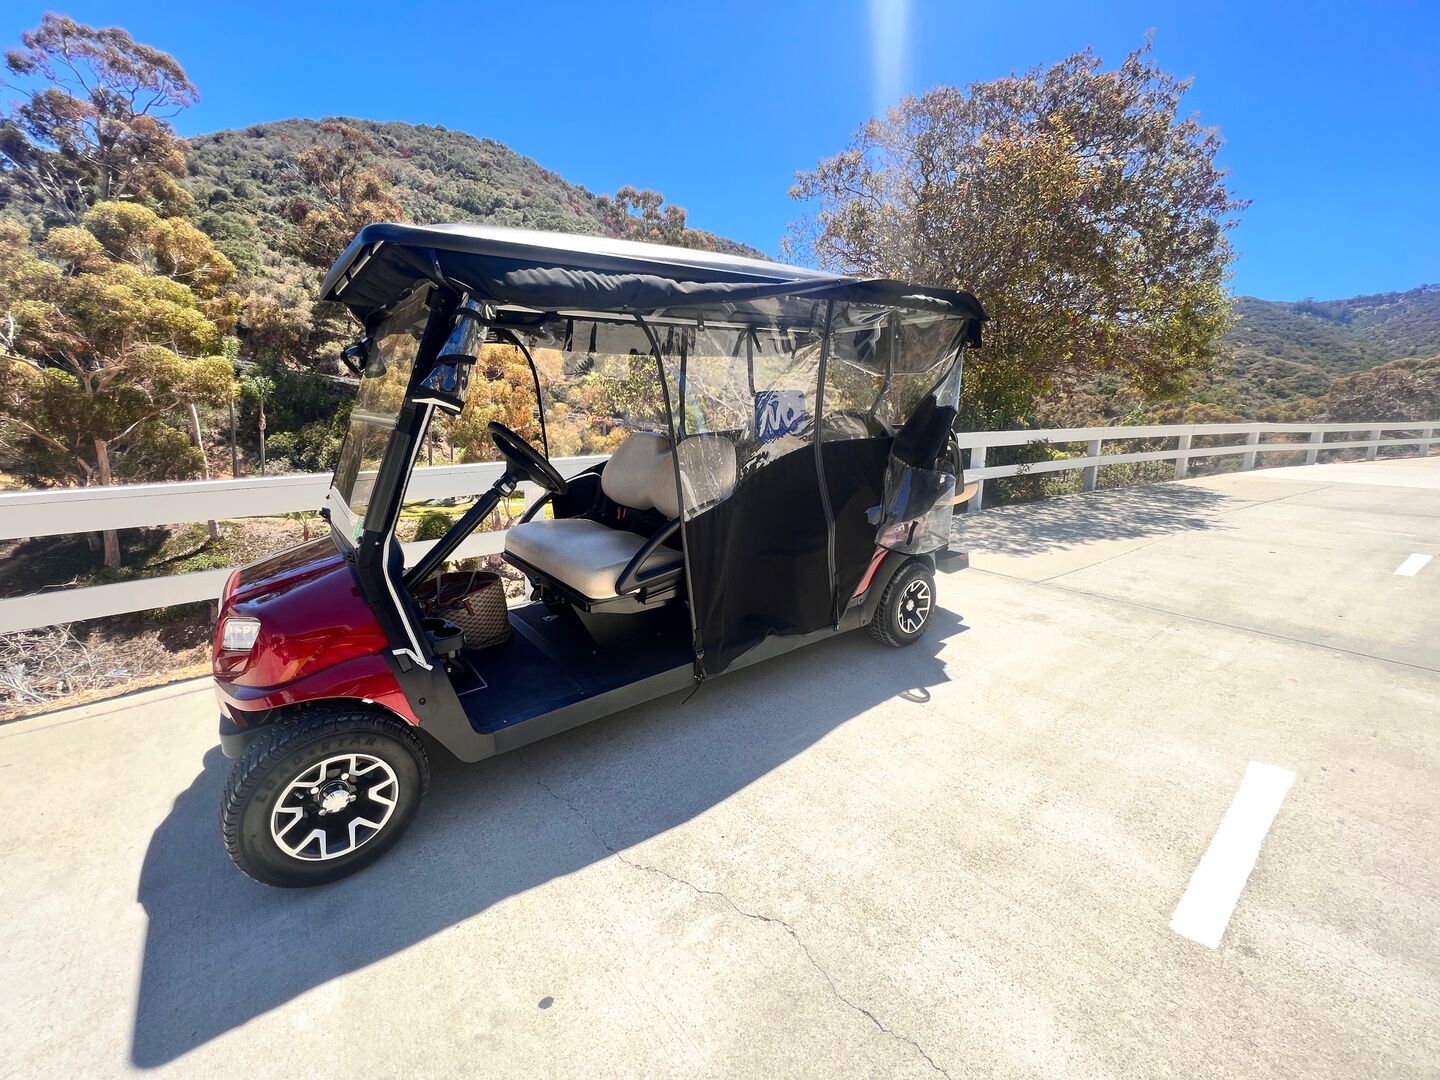 New Club Golf Cart with room for 6 people